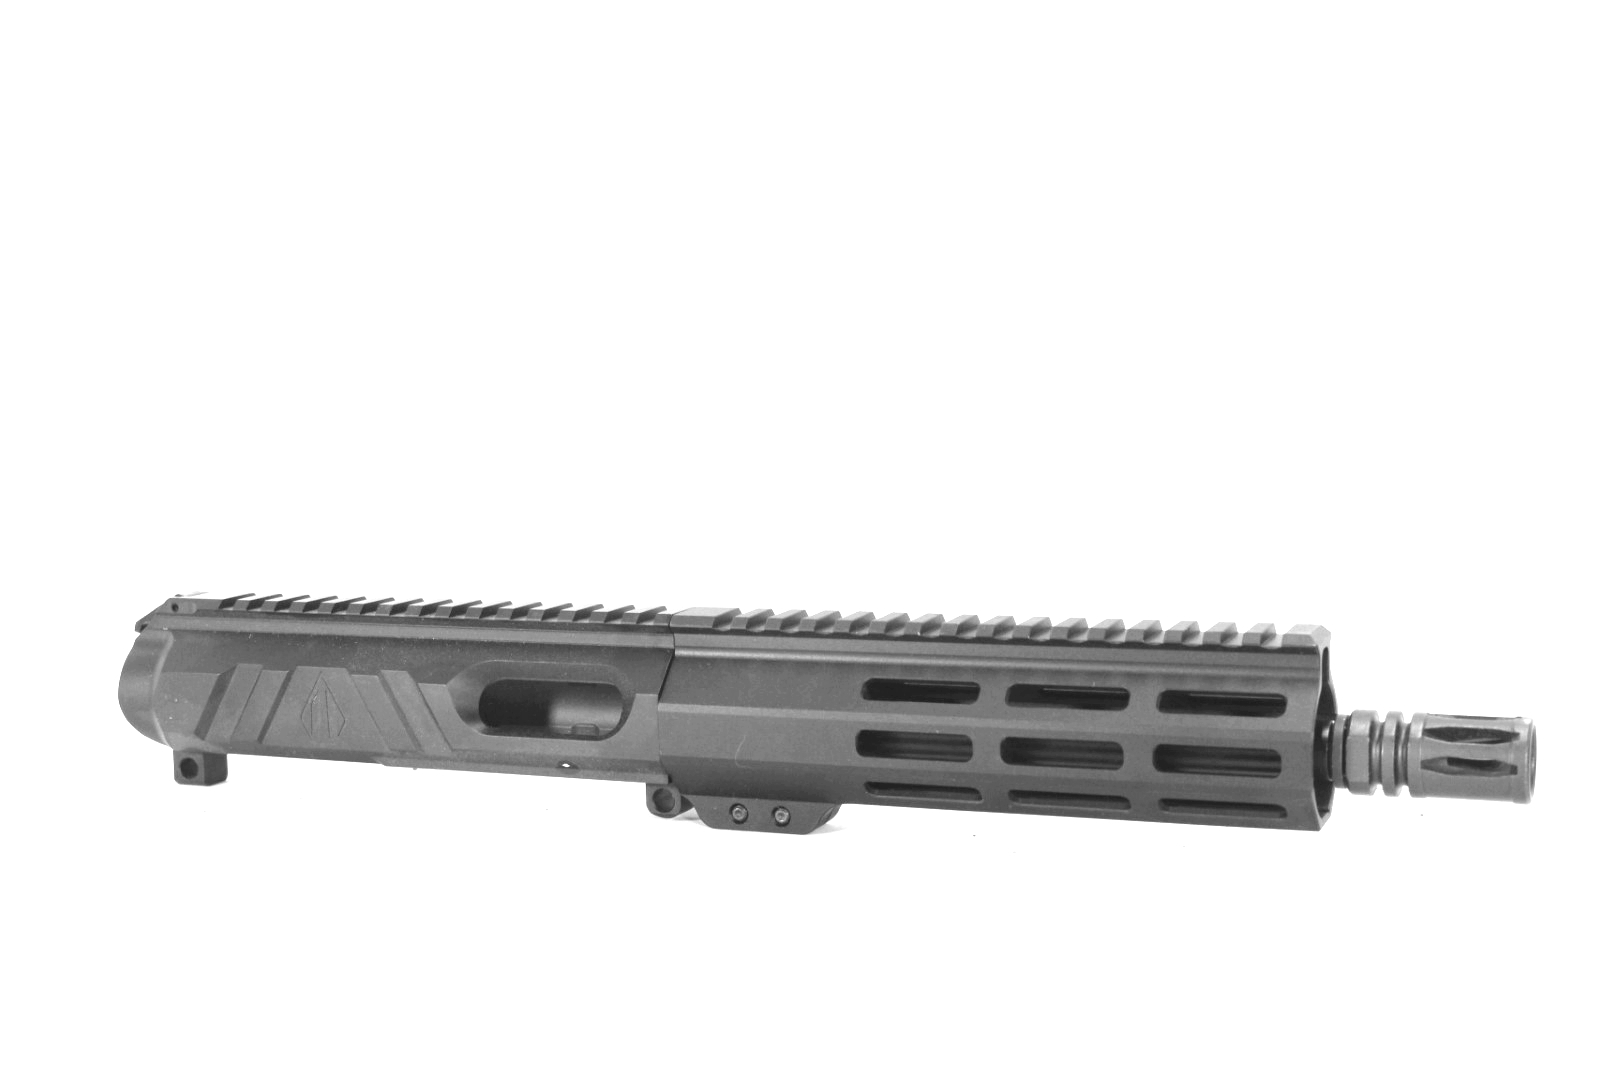 8 inch AR-15 Non Reciprocating Side Charging 9mm Upper